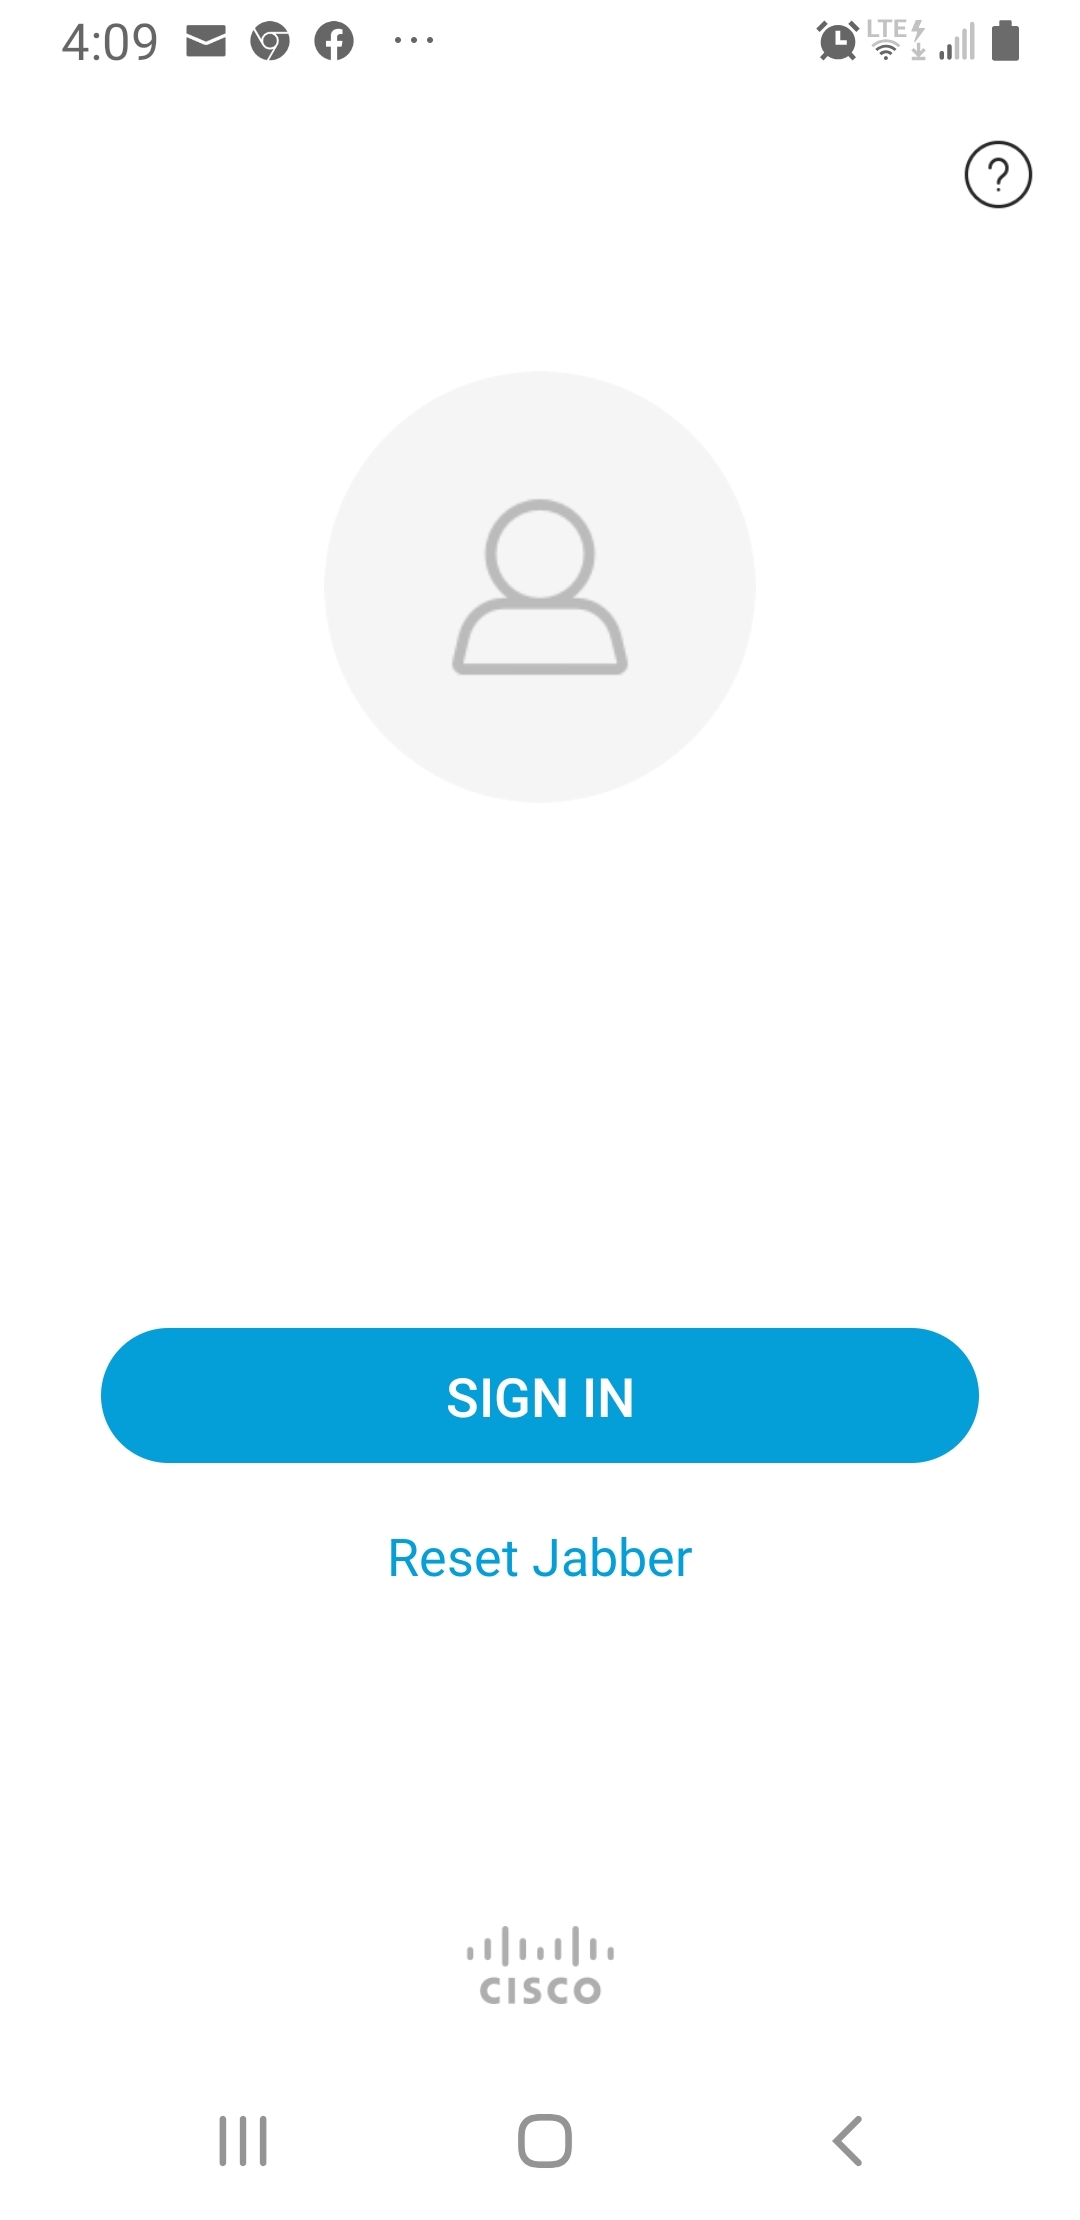 Jabber sign in page